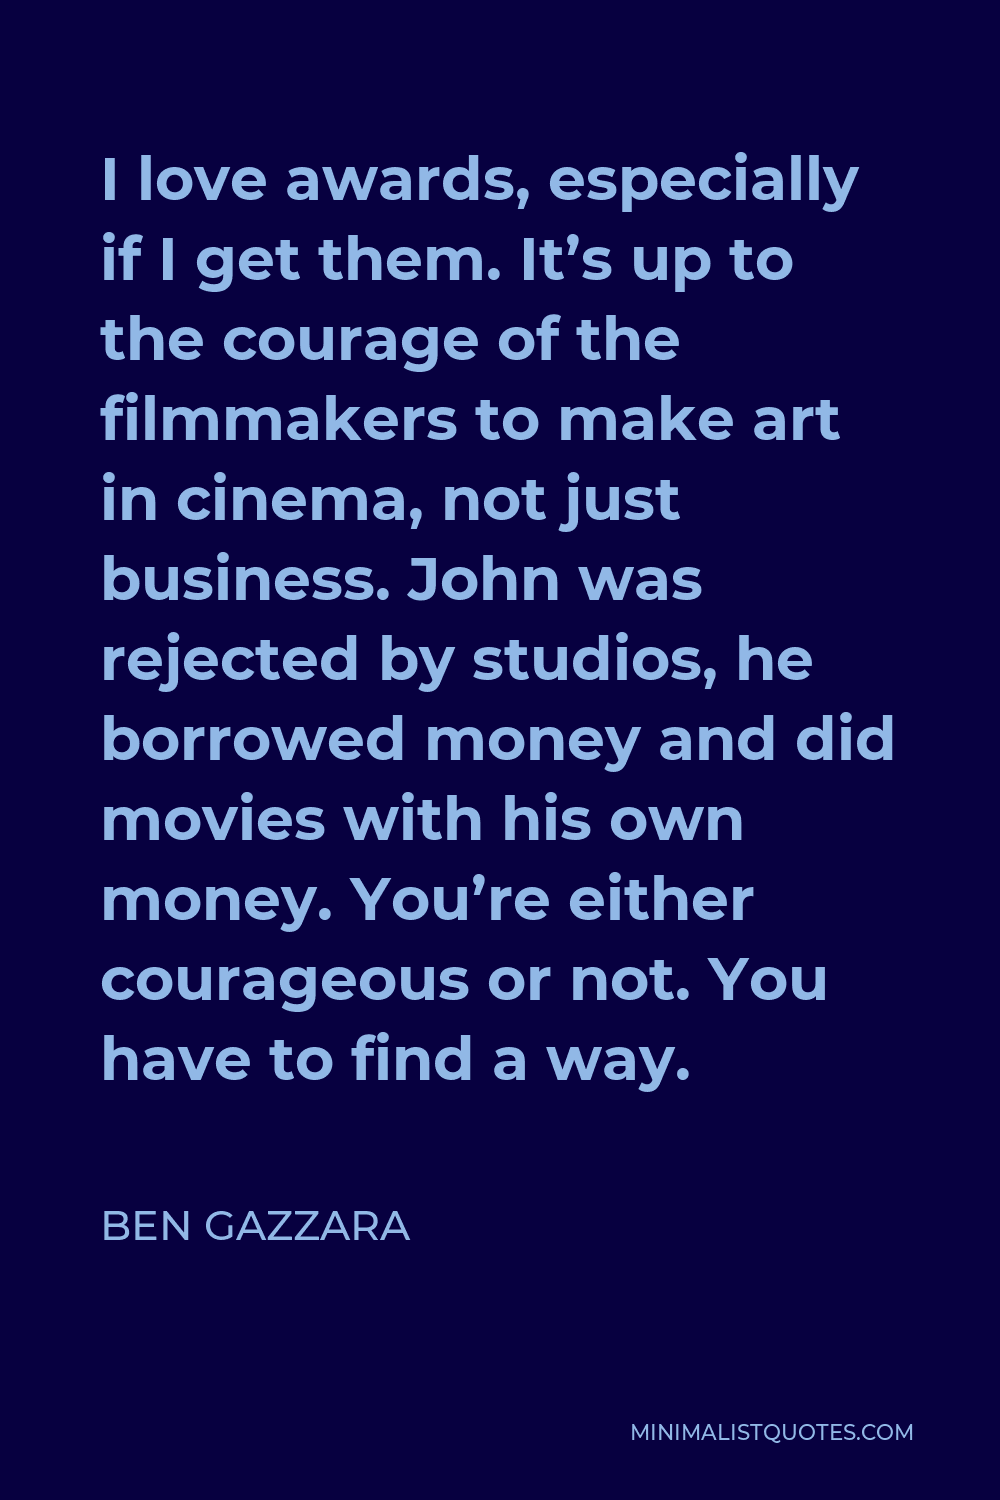 Ben Gazzara Quote - I love awards, especially if I get them. It’s up to the courage of the filmmakers to make art in cinema, not just business. John was rejected by studios, he borrowed money and did movies with his own money. You’re either courageous or not. You have to find a way.